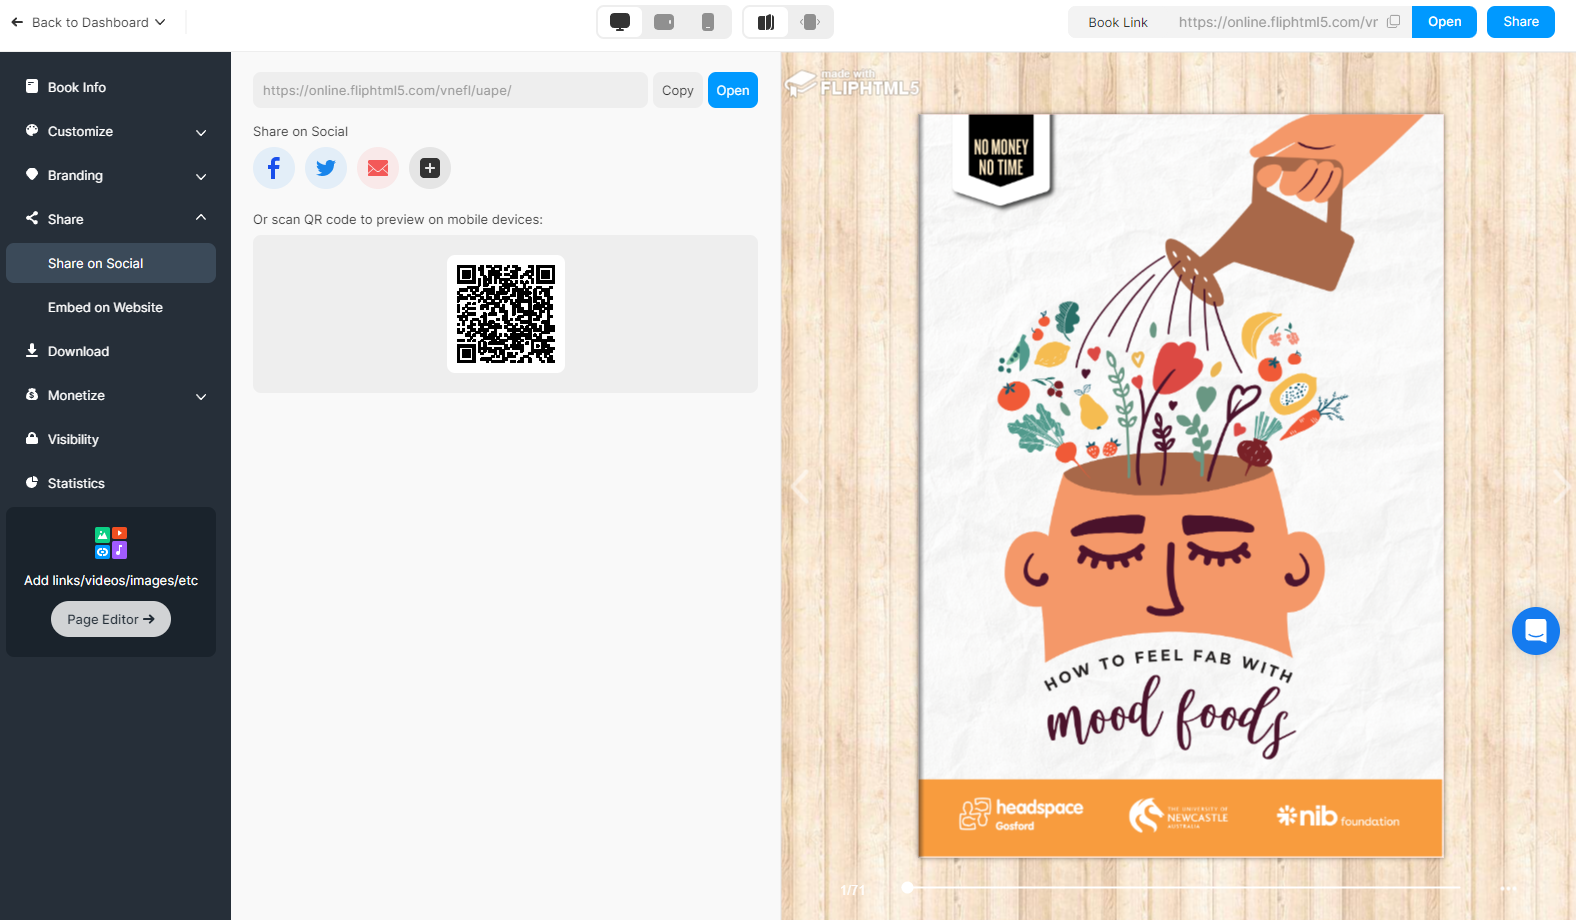 Share the flipbook online via email, chat groups, social media, and many other distribution channels with its auto-generated unique URL and QR code. Or embed it on websites with the given embed code.